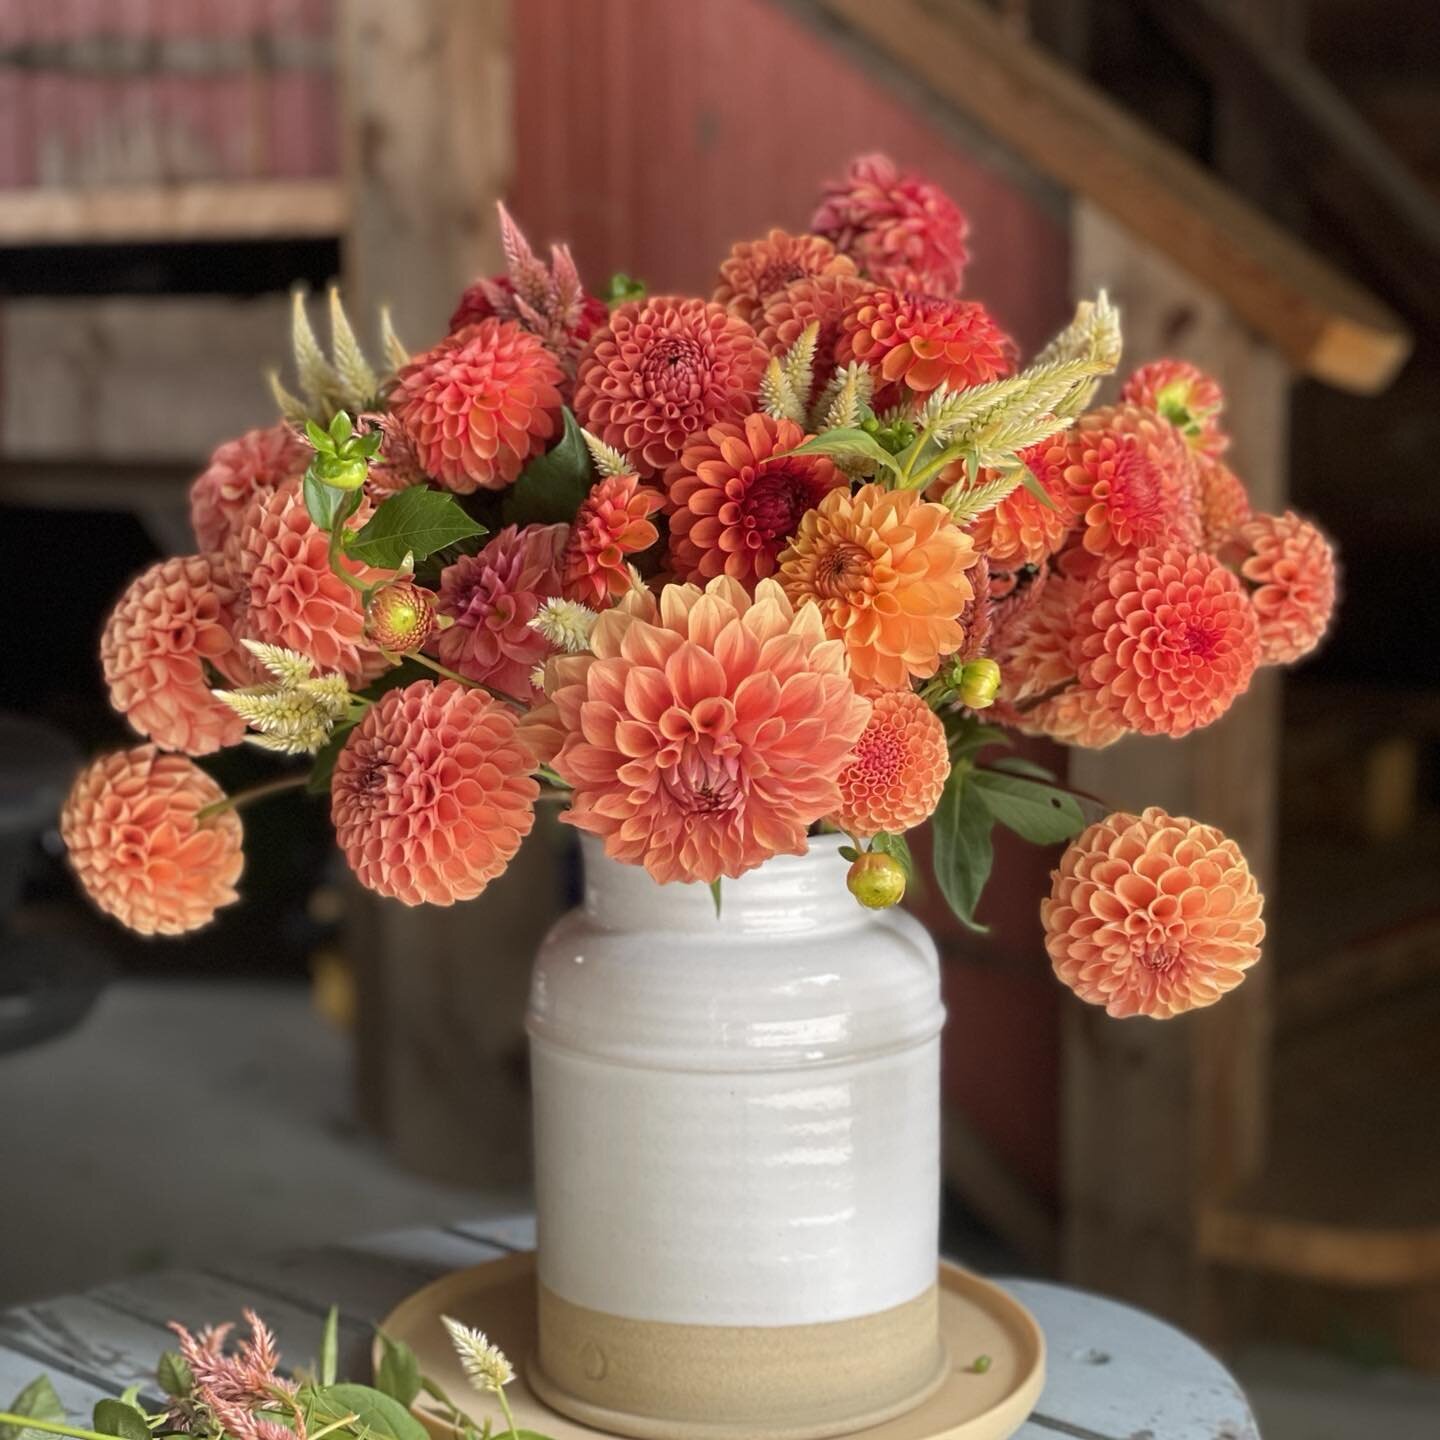 Another Sunday jug of leftover flowers - it&rsquo;s a mash up of 40 dahlias and a fistful of celosia.  With just a couple of weeks left before the frost shuts down our gardens these are soooo enjoyable!! 
#flowerfarmer #newenglandfarmerflorist 
#dahl